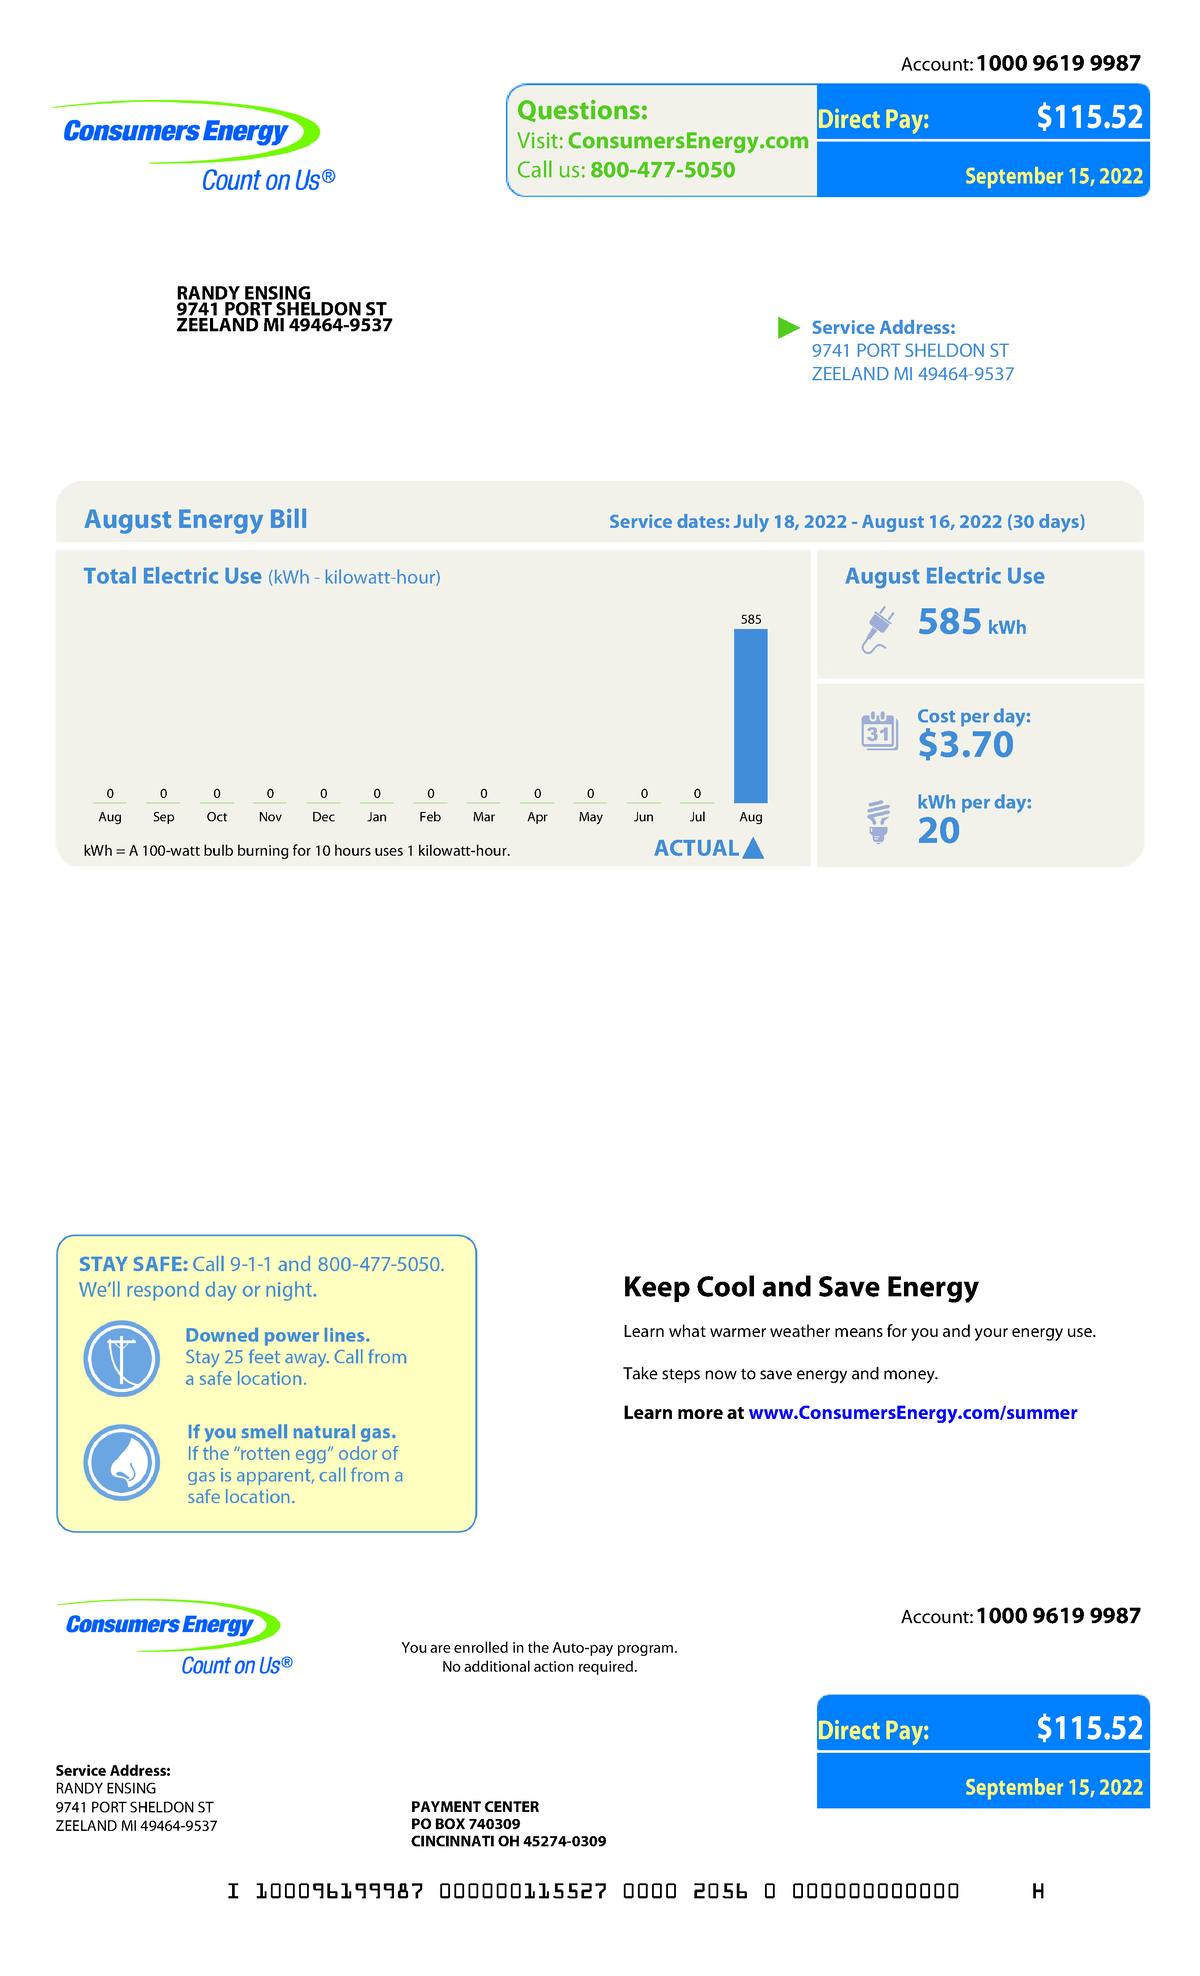 Does Consumers Energy Pay For Old Appliances